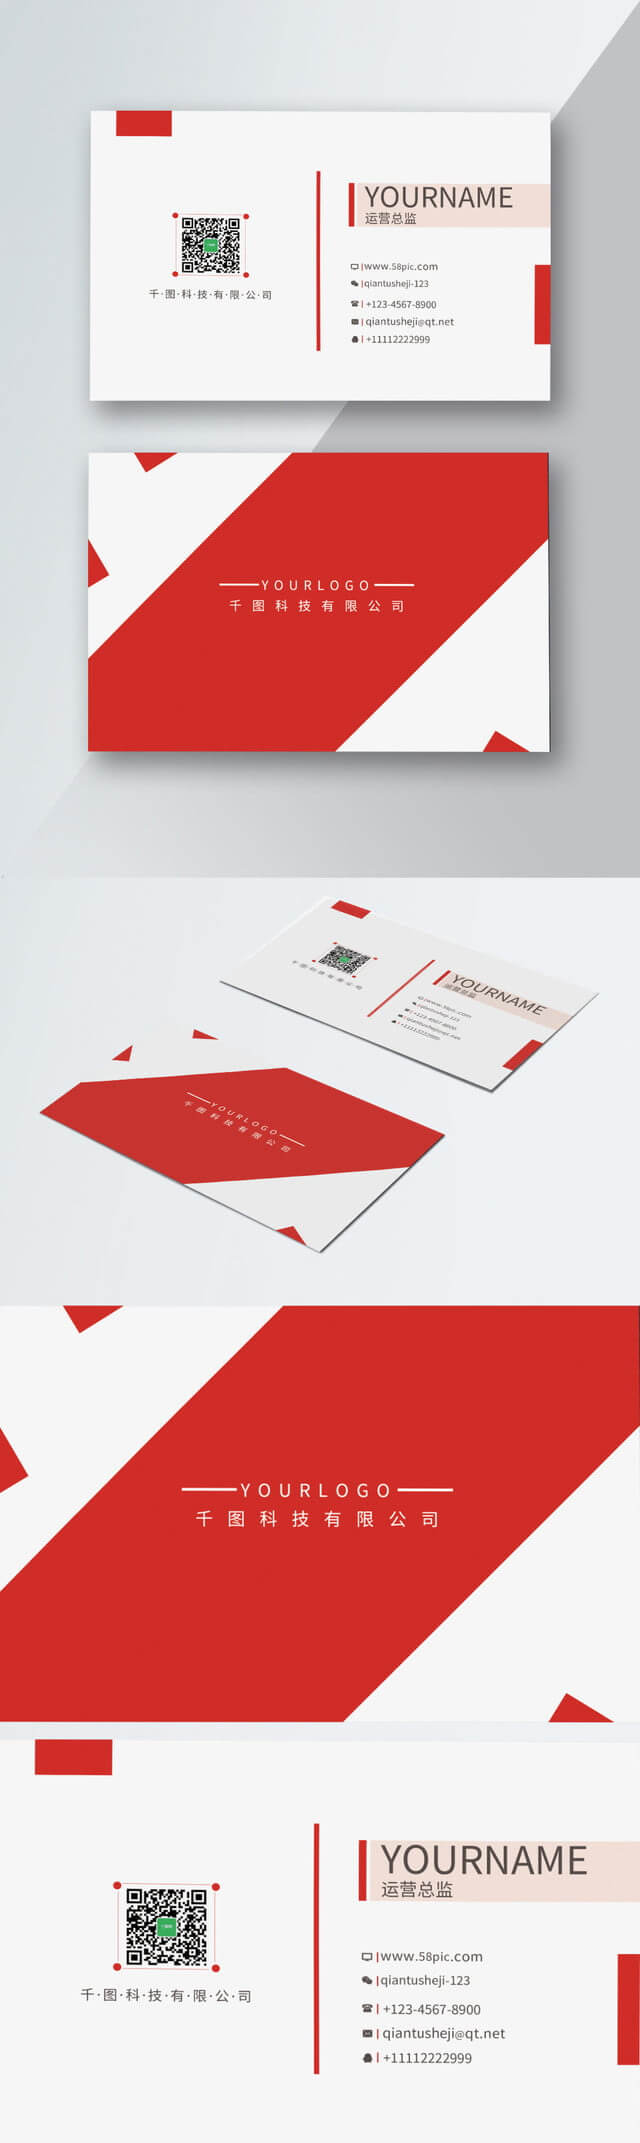 Ccb Business Card Construction Bank Ccb Business Card Within Construction Business Card Templates Download Free